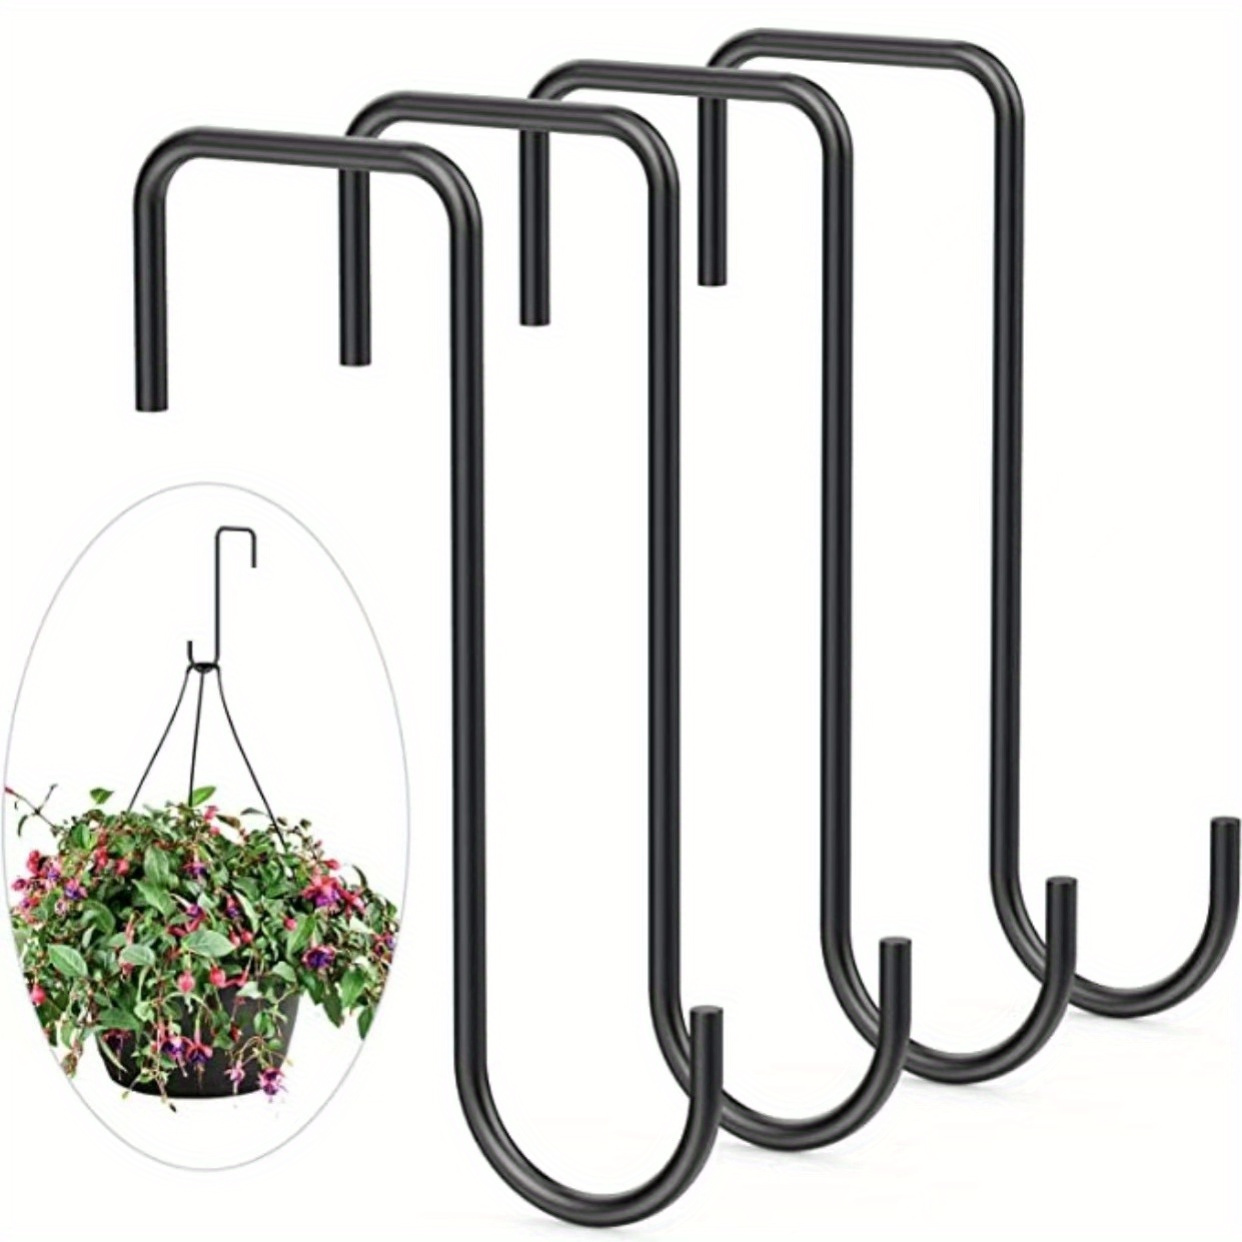 

Heavy-duty Stainless Steel Fence Hooks - 2/4/6 Piece, Easy Install Over-door Plant Hangers For Indoor & Outdoor Use - Perfect For Gardens, Bird Feeders, Lanterns (black)